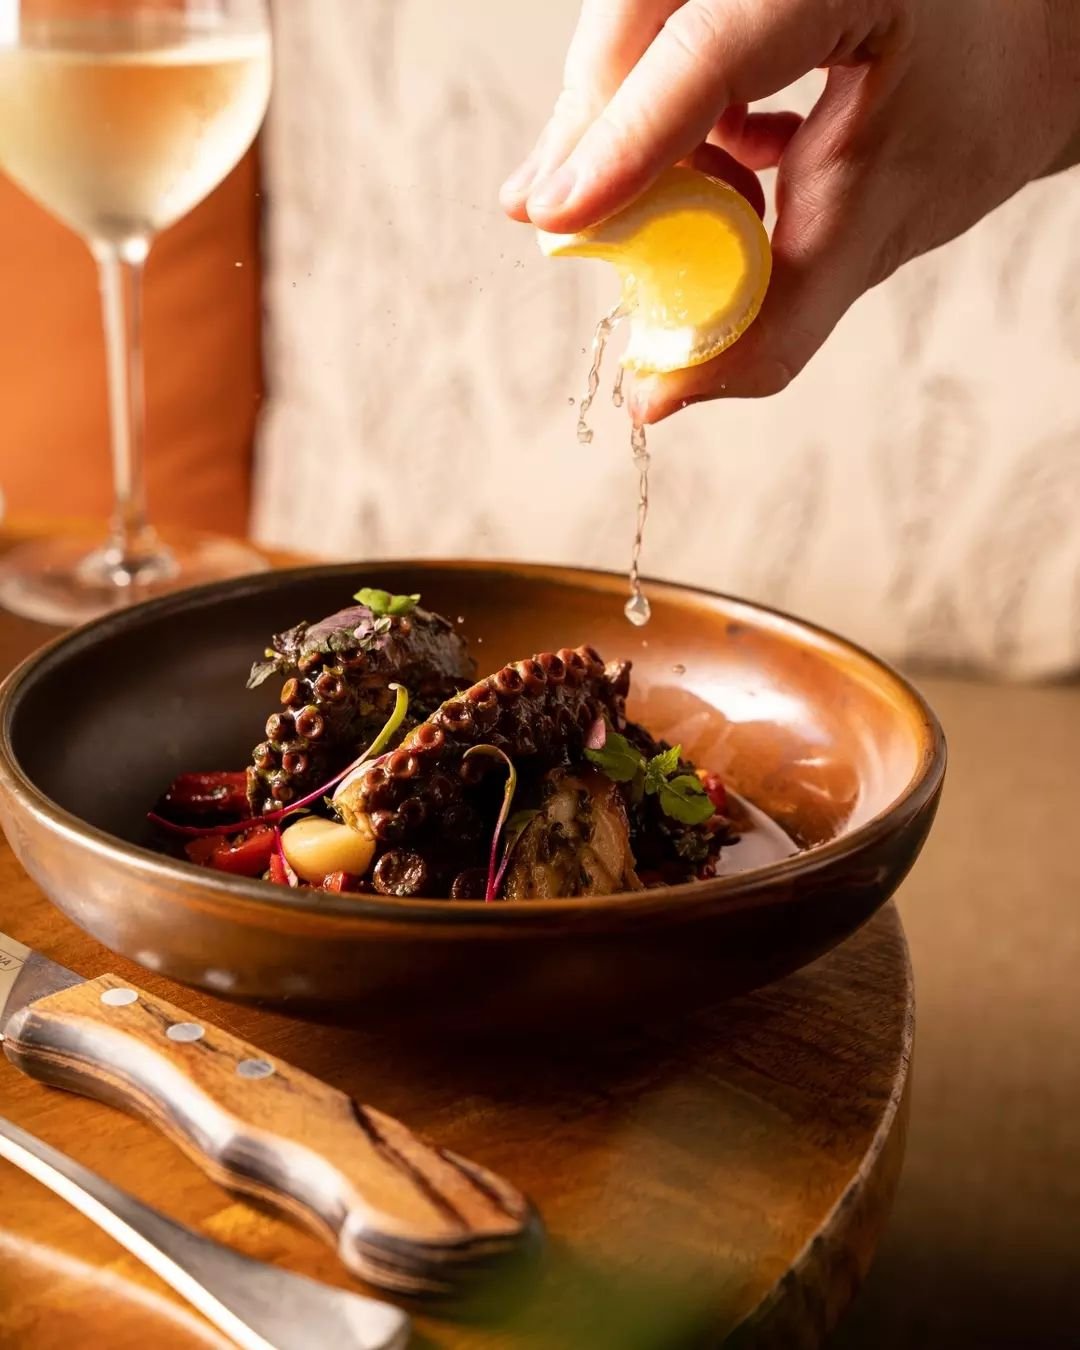 When life gives you lemons - squeeze them over our Chargrilled Fremantle Octopus!